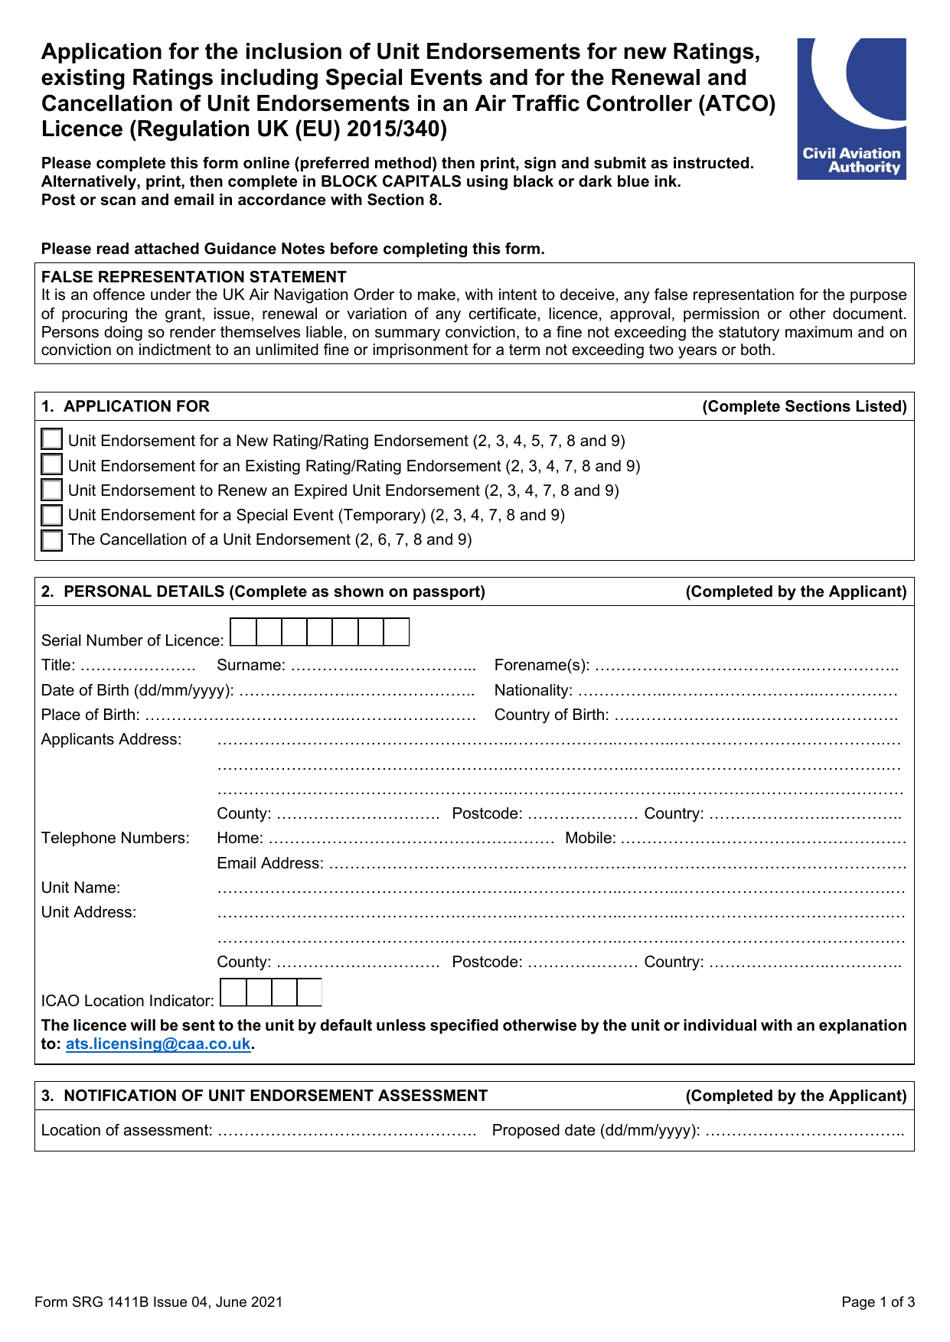 Form SRG1411B Application for the Inclusion of Unit Endorsements for New Ratings, Existing Ratings Including Special Events and for the Renewal and Cancellation of Unit Endorsements in an Air Traffic Controller (Atco) Licence (Regulation UK (Eu) 2015 / 340) - United Kingdom, Page 1